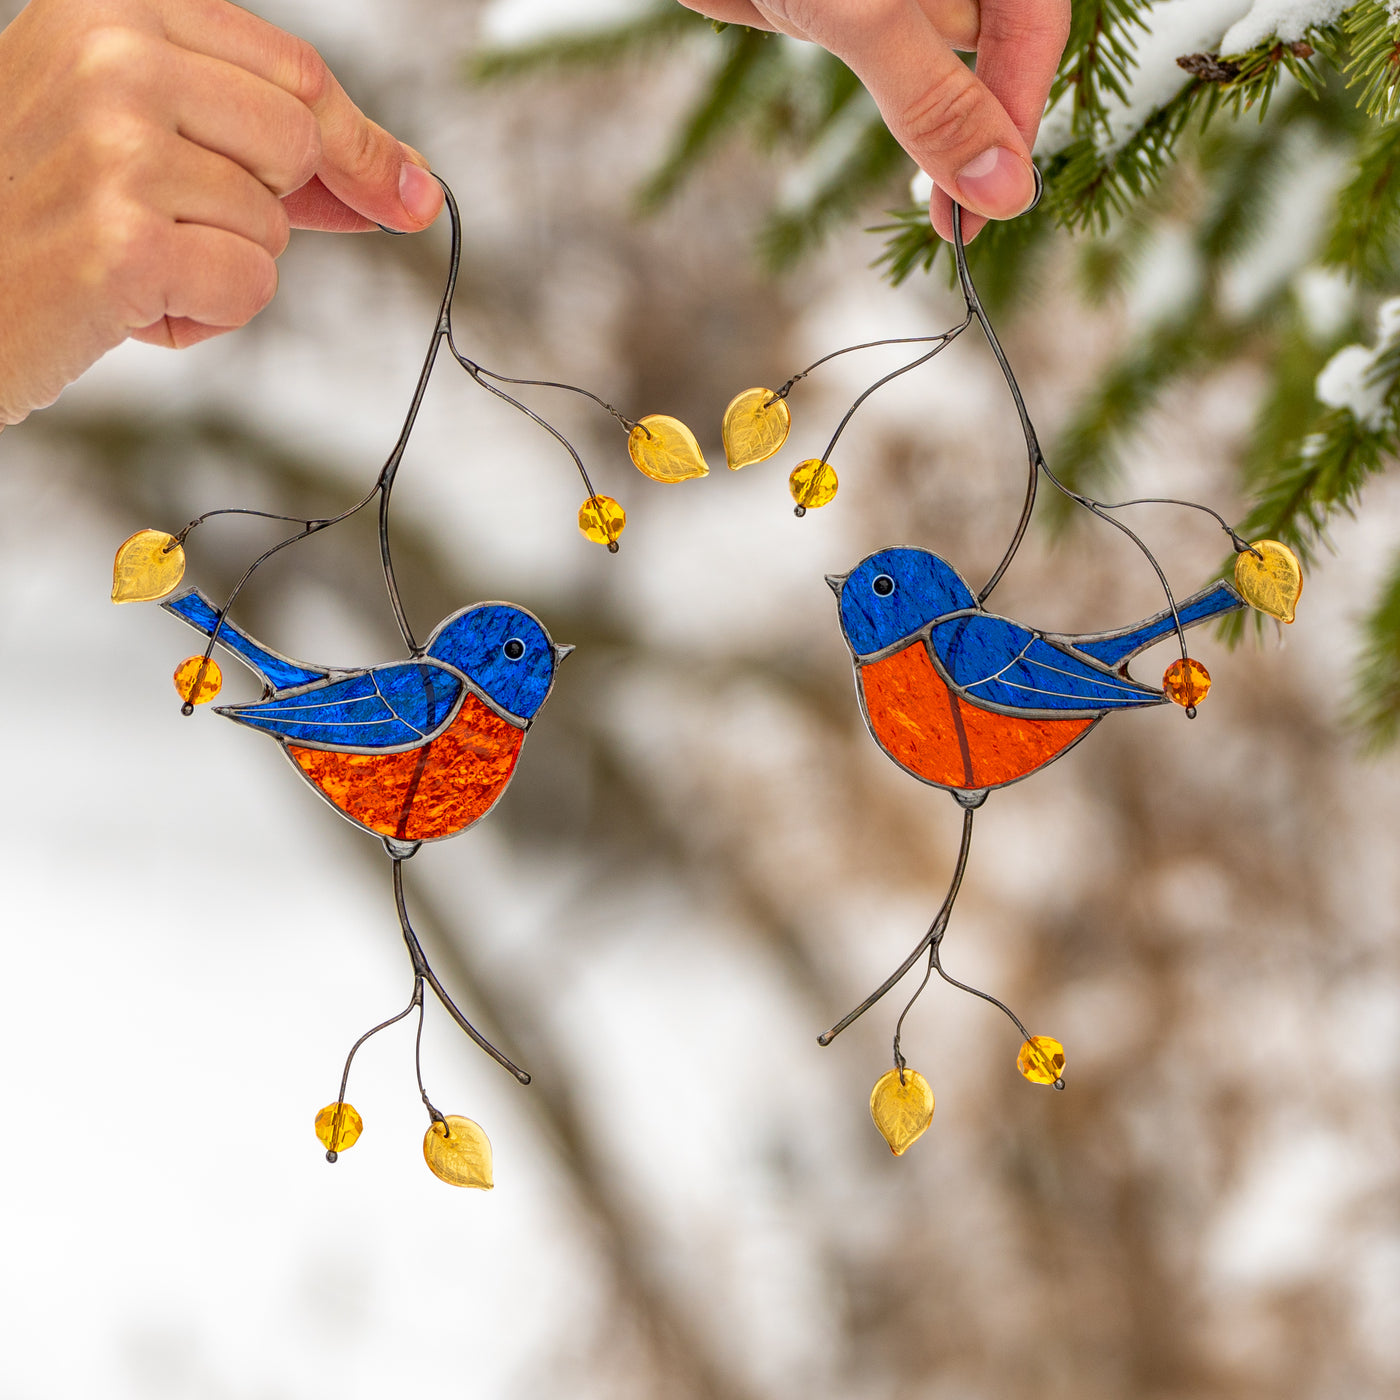 Stained glass bluebirds sitting on the branch window hanging